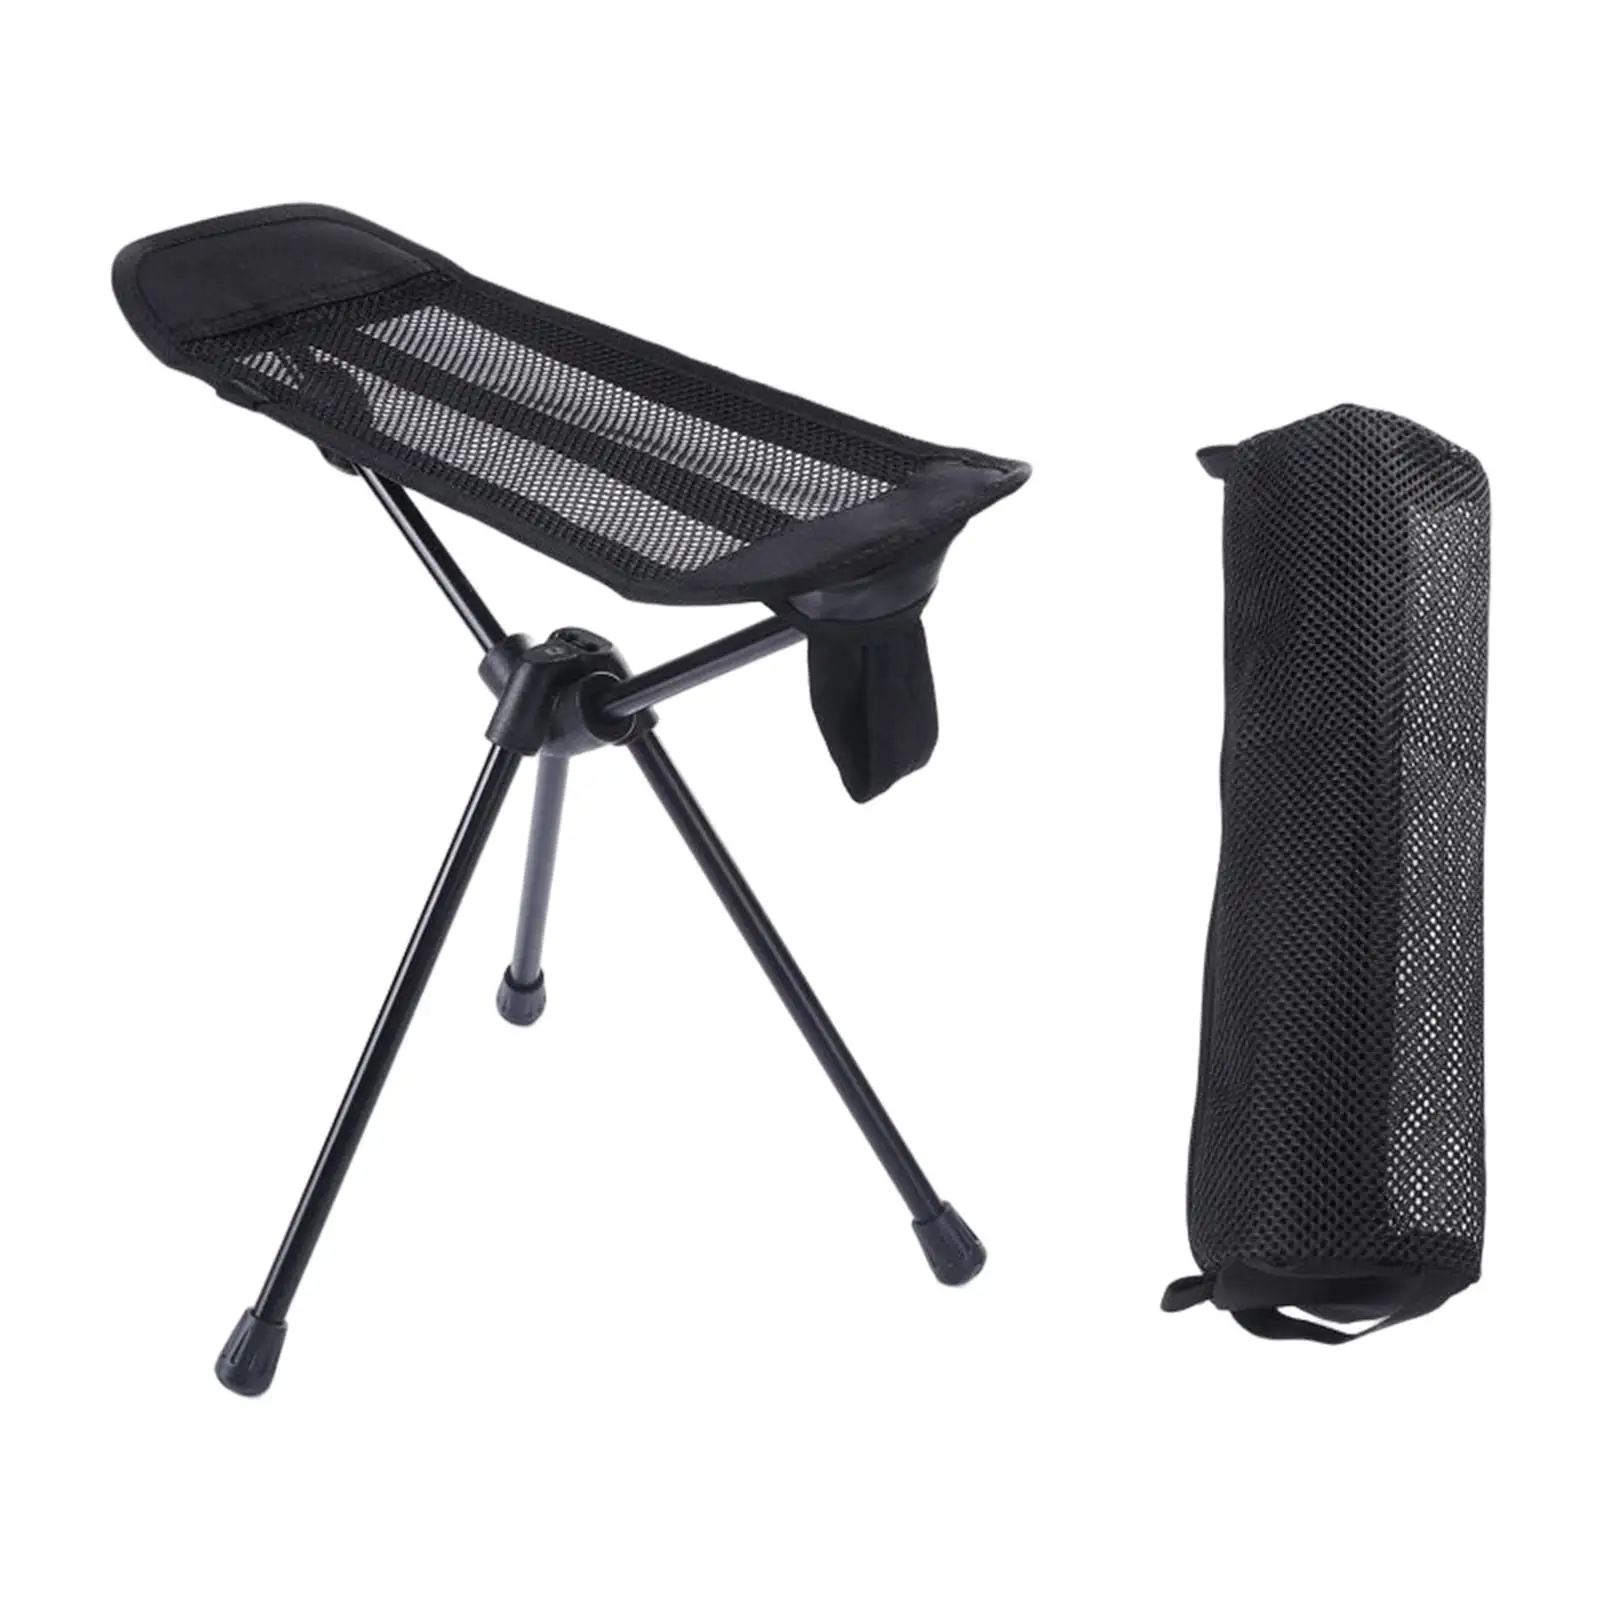 Portable Folding Chair Outdoor Camping Recliner Lazy Retractable Footrest Leg Rest for Hiking Fishing Picnic